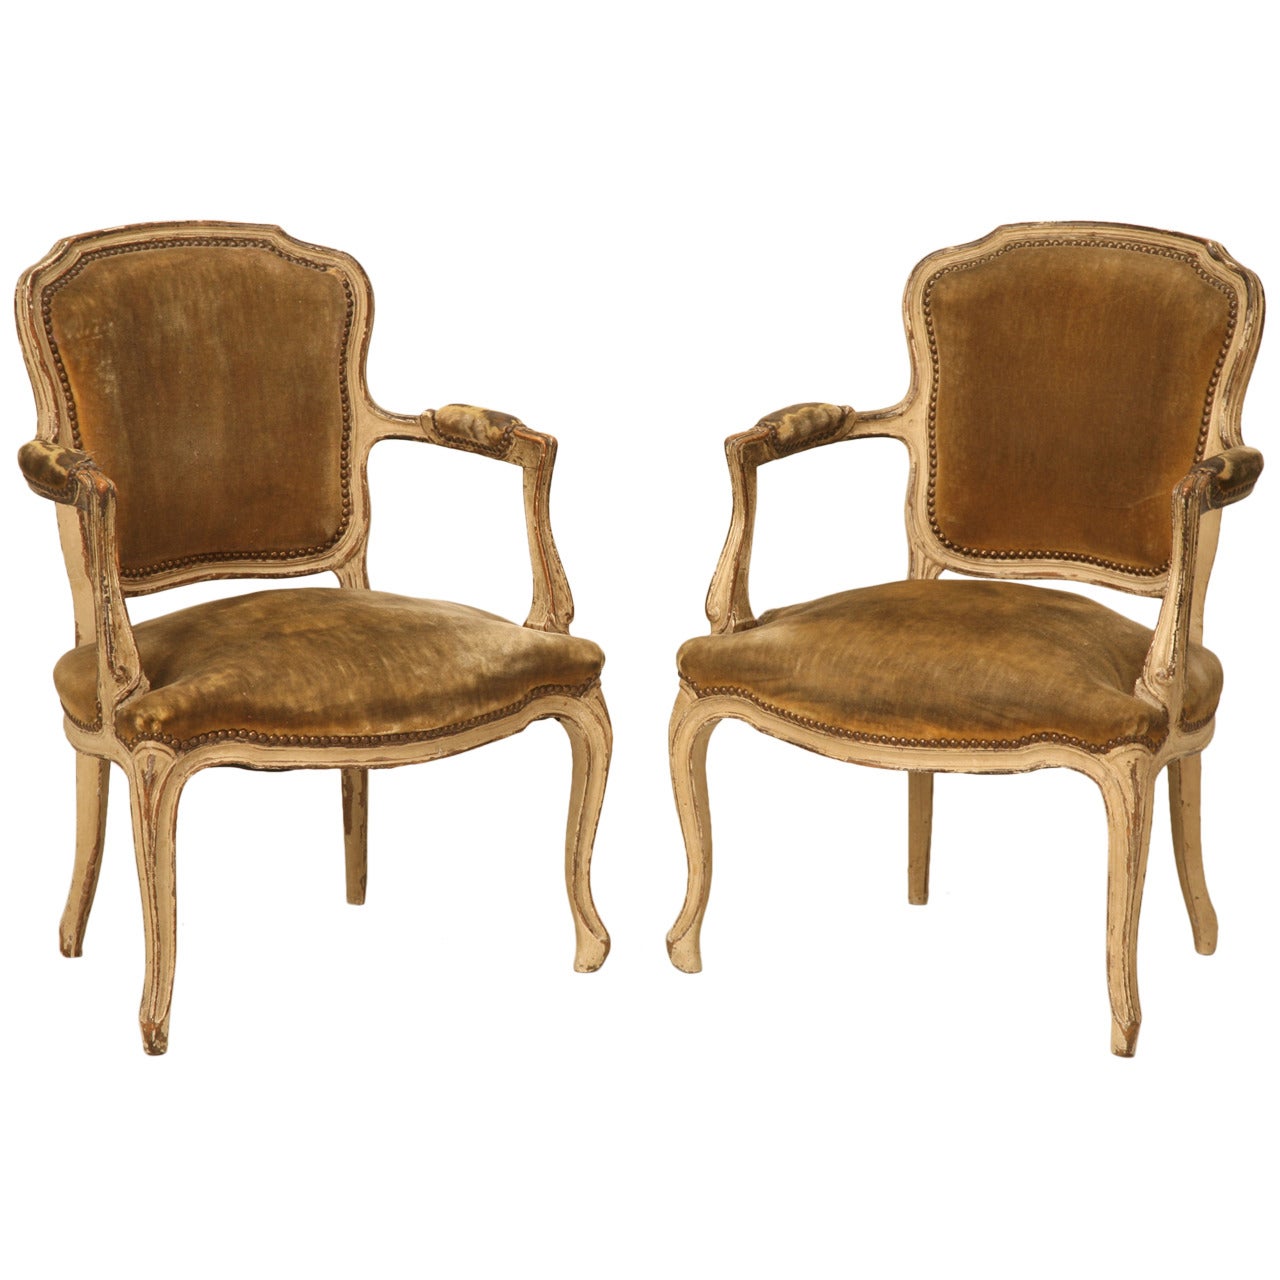 Pair of Early 1800's Louis XV Style Armchairs with Incredible Old Paint